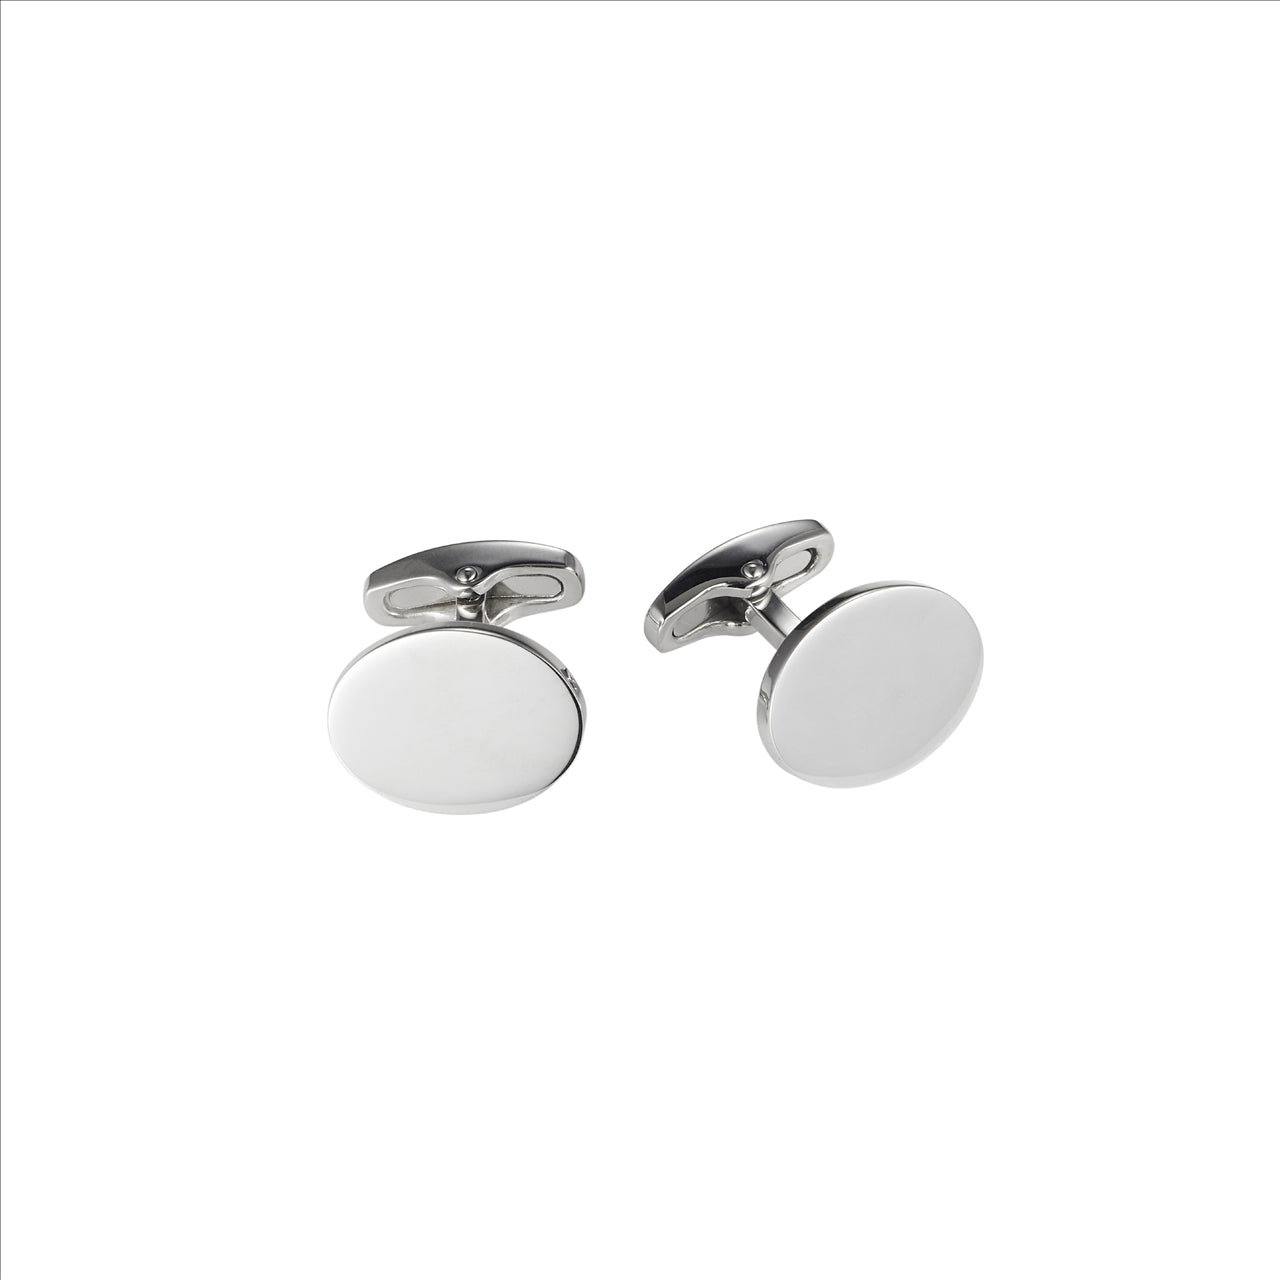 Polished Stainless Steel Oval Cufflinks